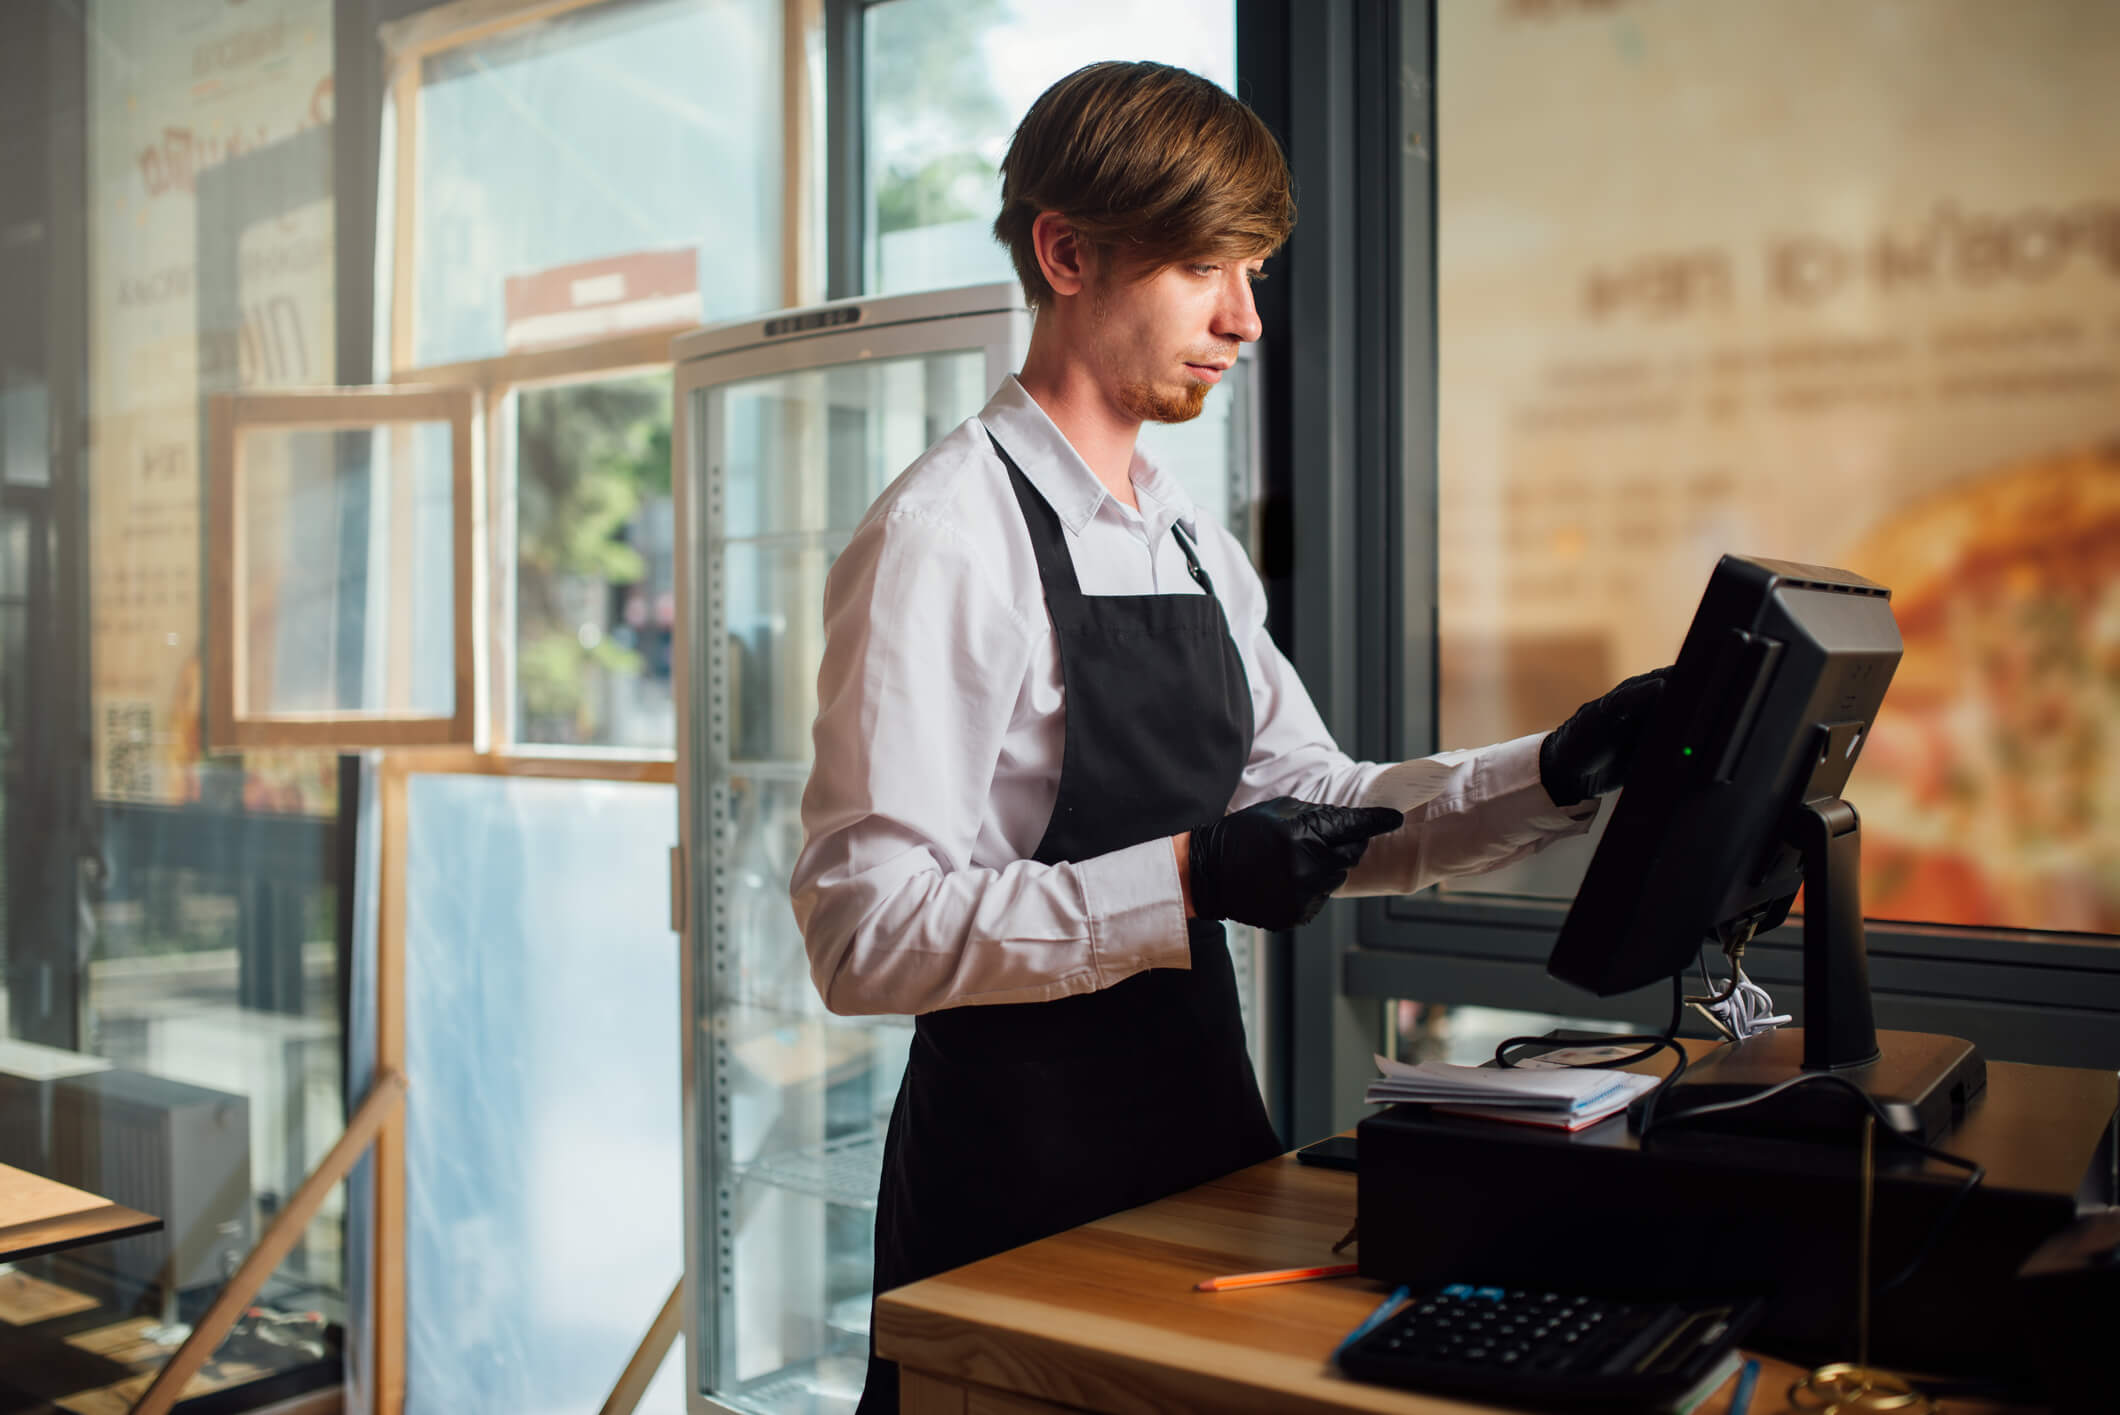 5 Best POS Equipped With Drive-Through Ordering Systems